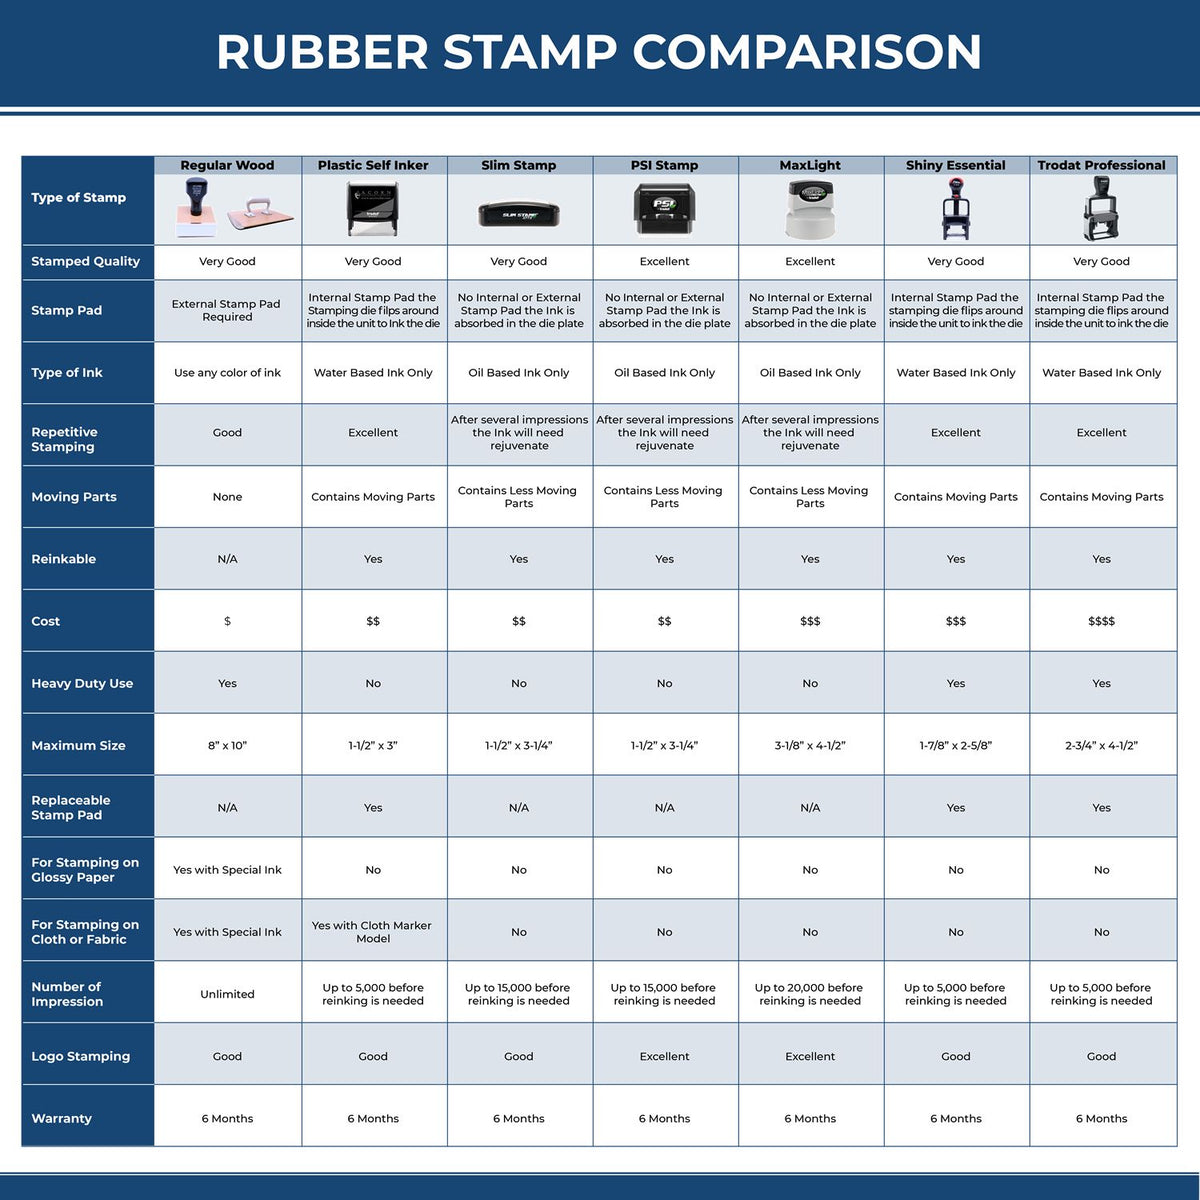 A comparison chart for the different types of mount models available for the Premium MaxLight Pre-Inked Pennsylvania Landscape Architectural Stamp.